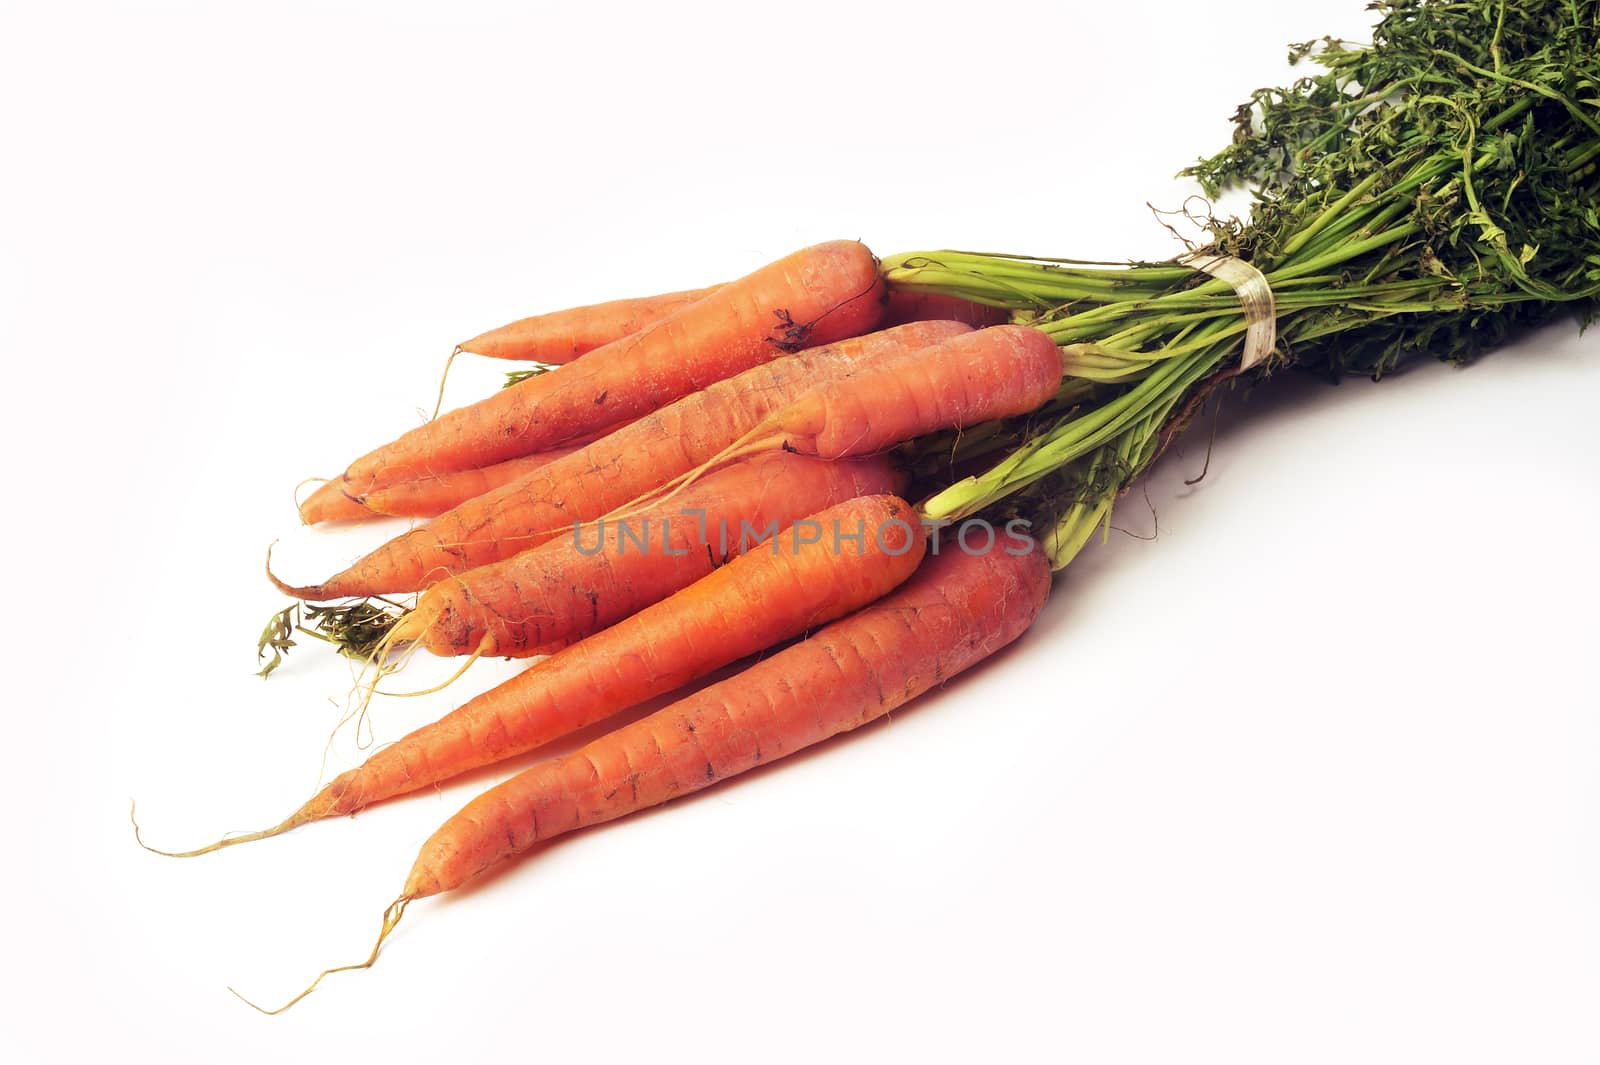 isolated on white background in studio carrots by gillespaire